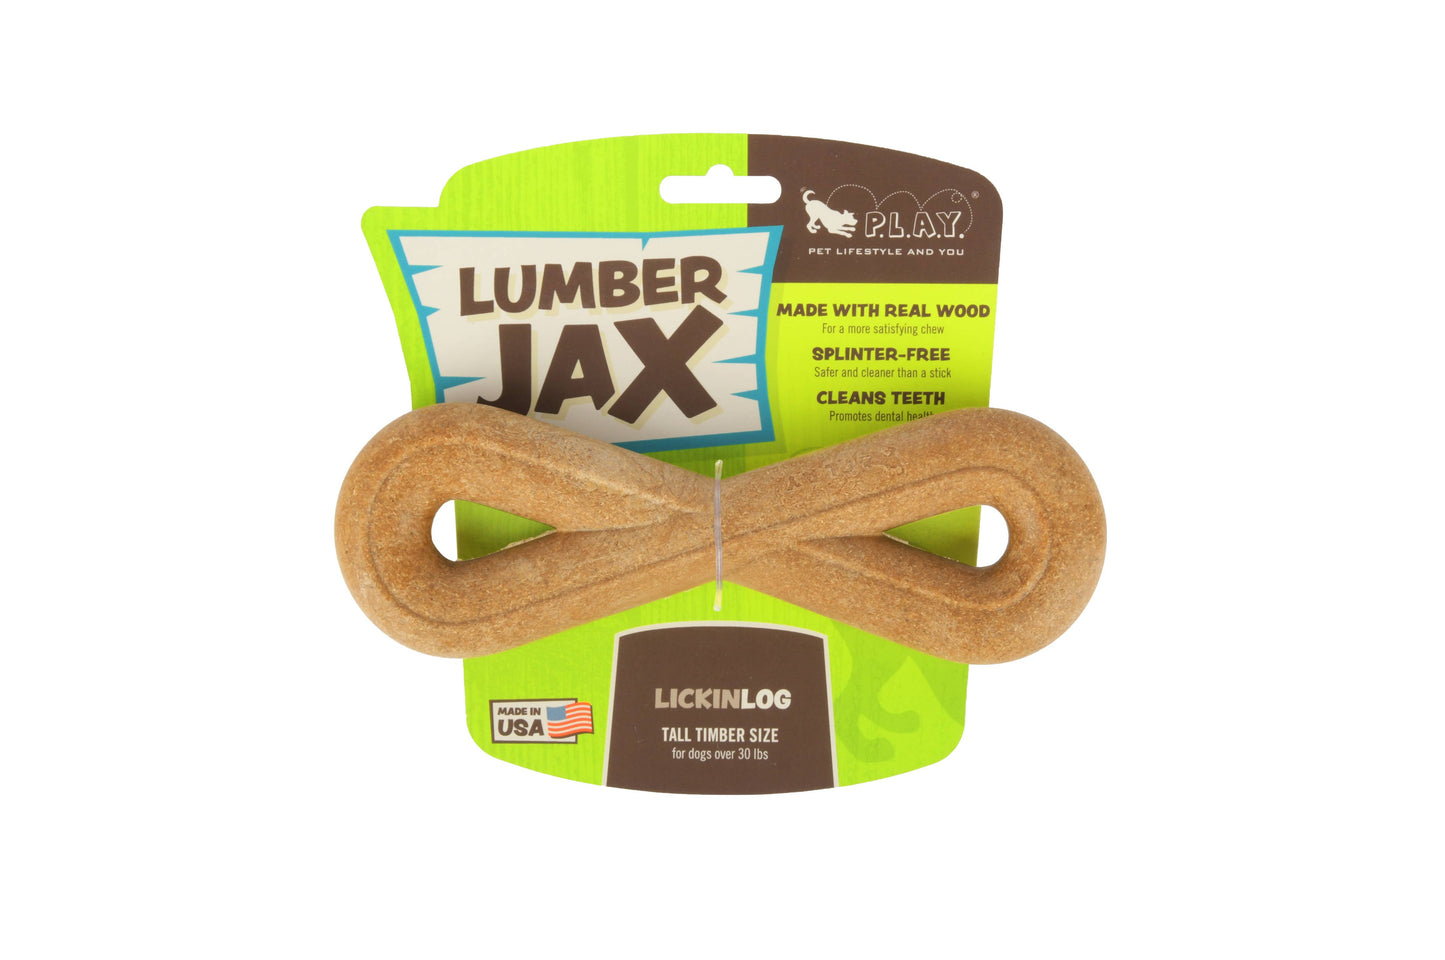 P.L.A.Y. Pet Lifestyle and You - ZoomieRex LumberJax Toy Large Image